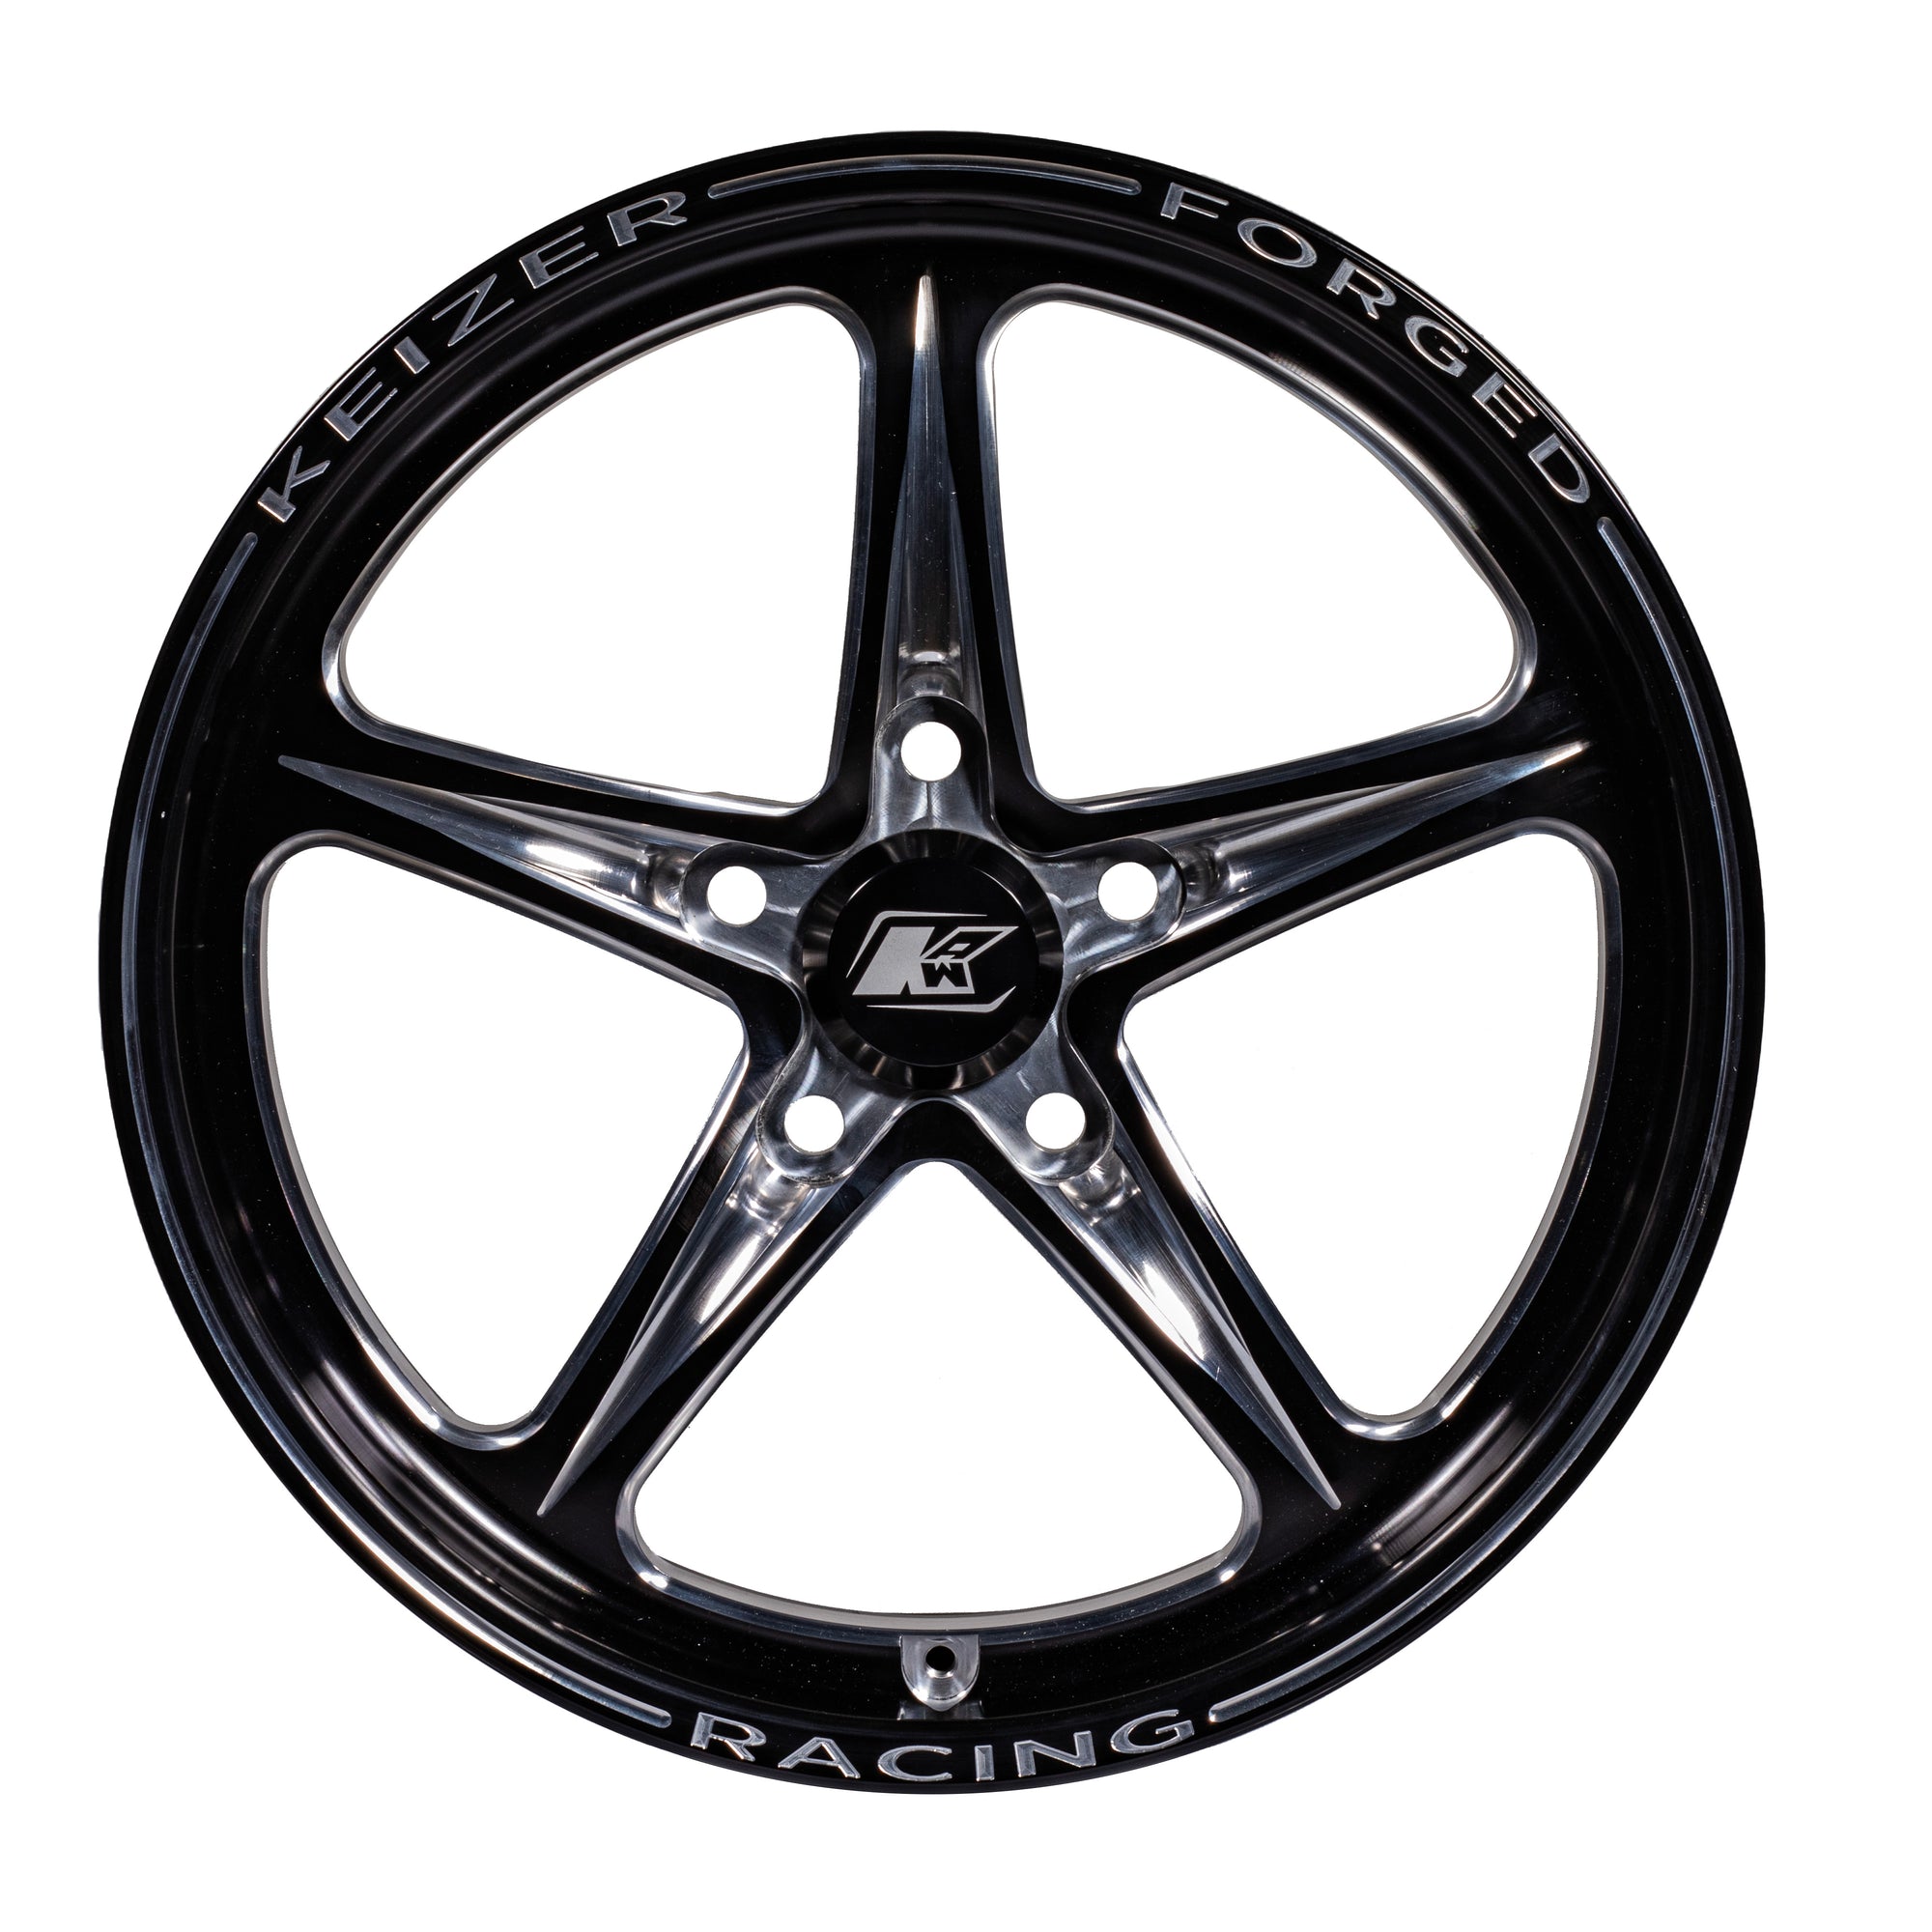 KEIZER VERBAND FORGED WHEEL (FRONT)